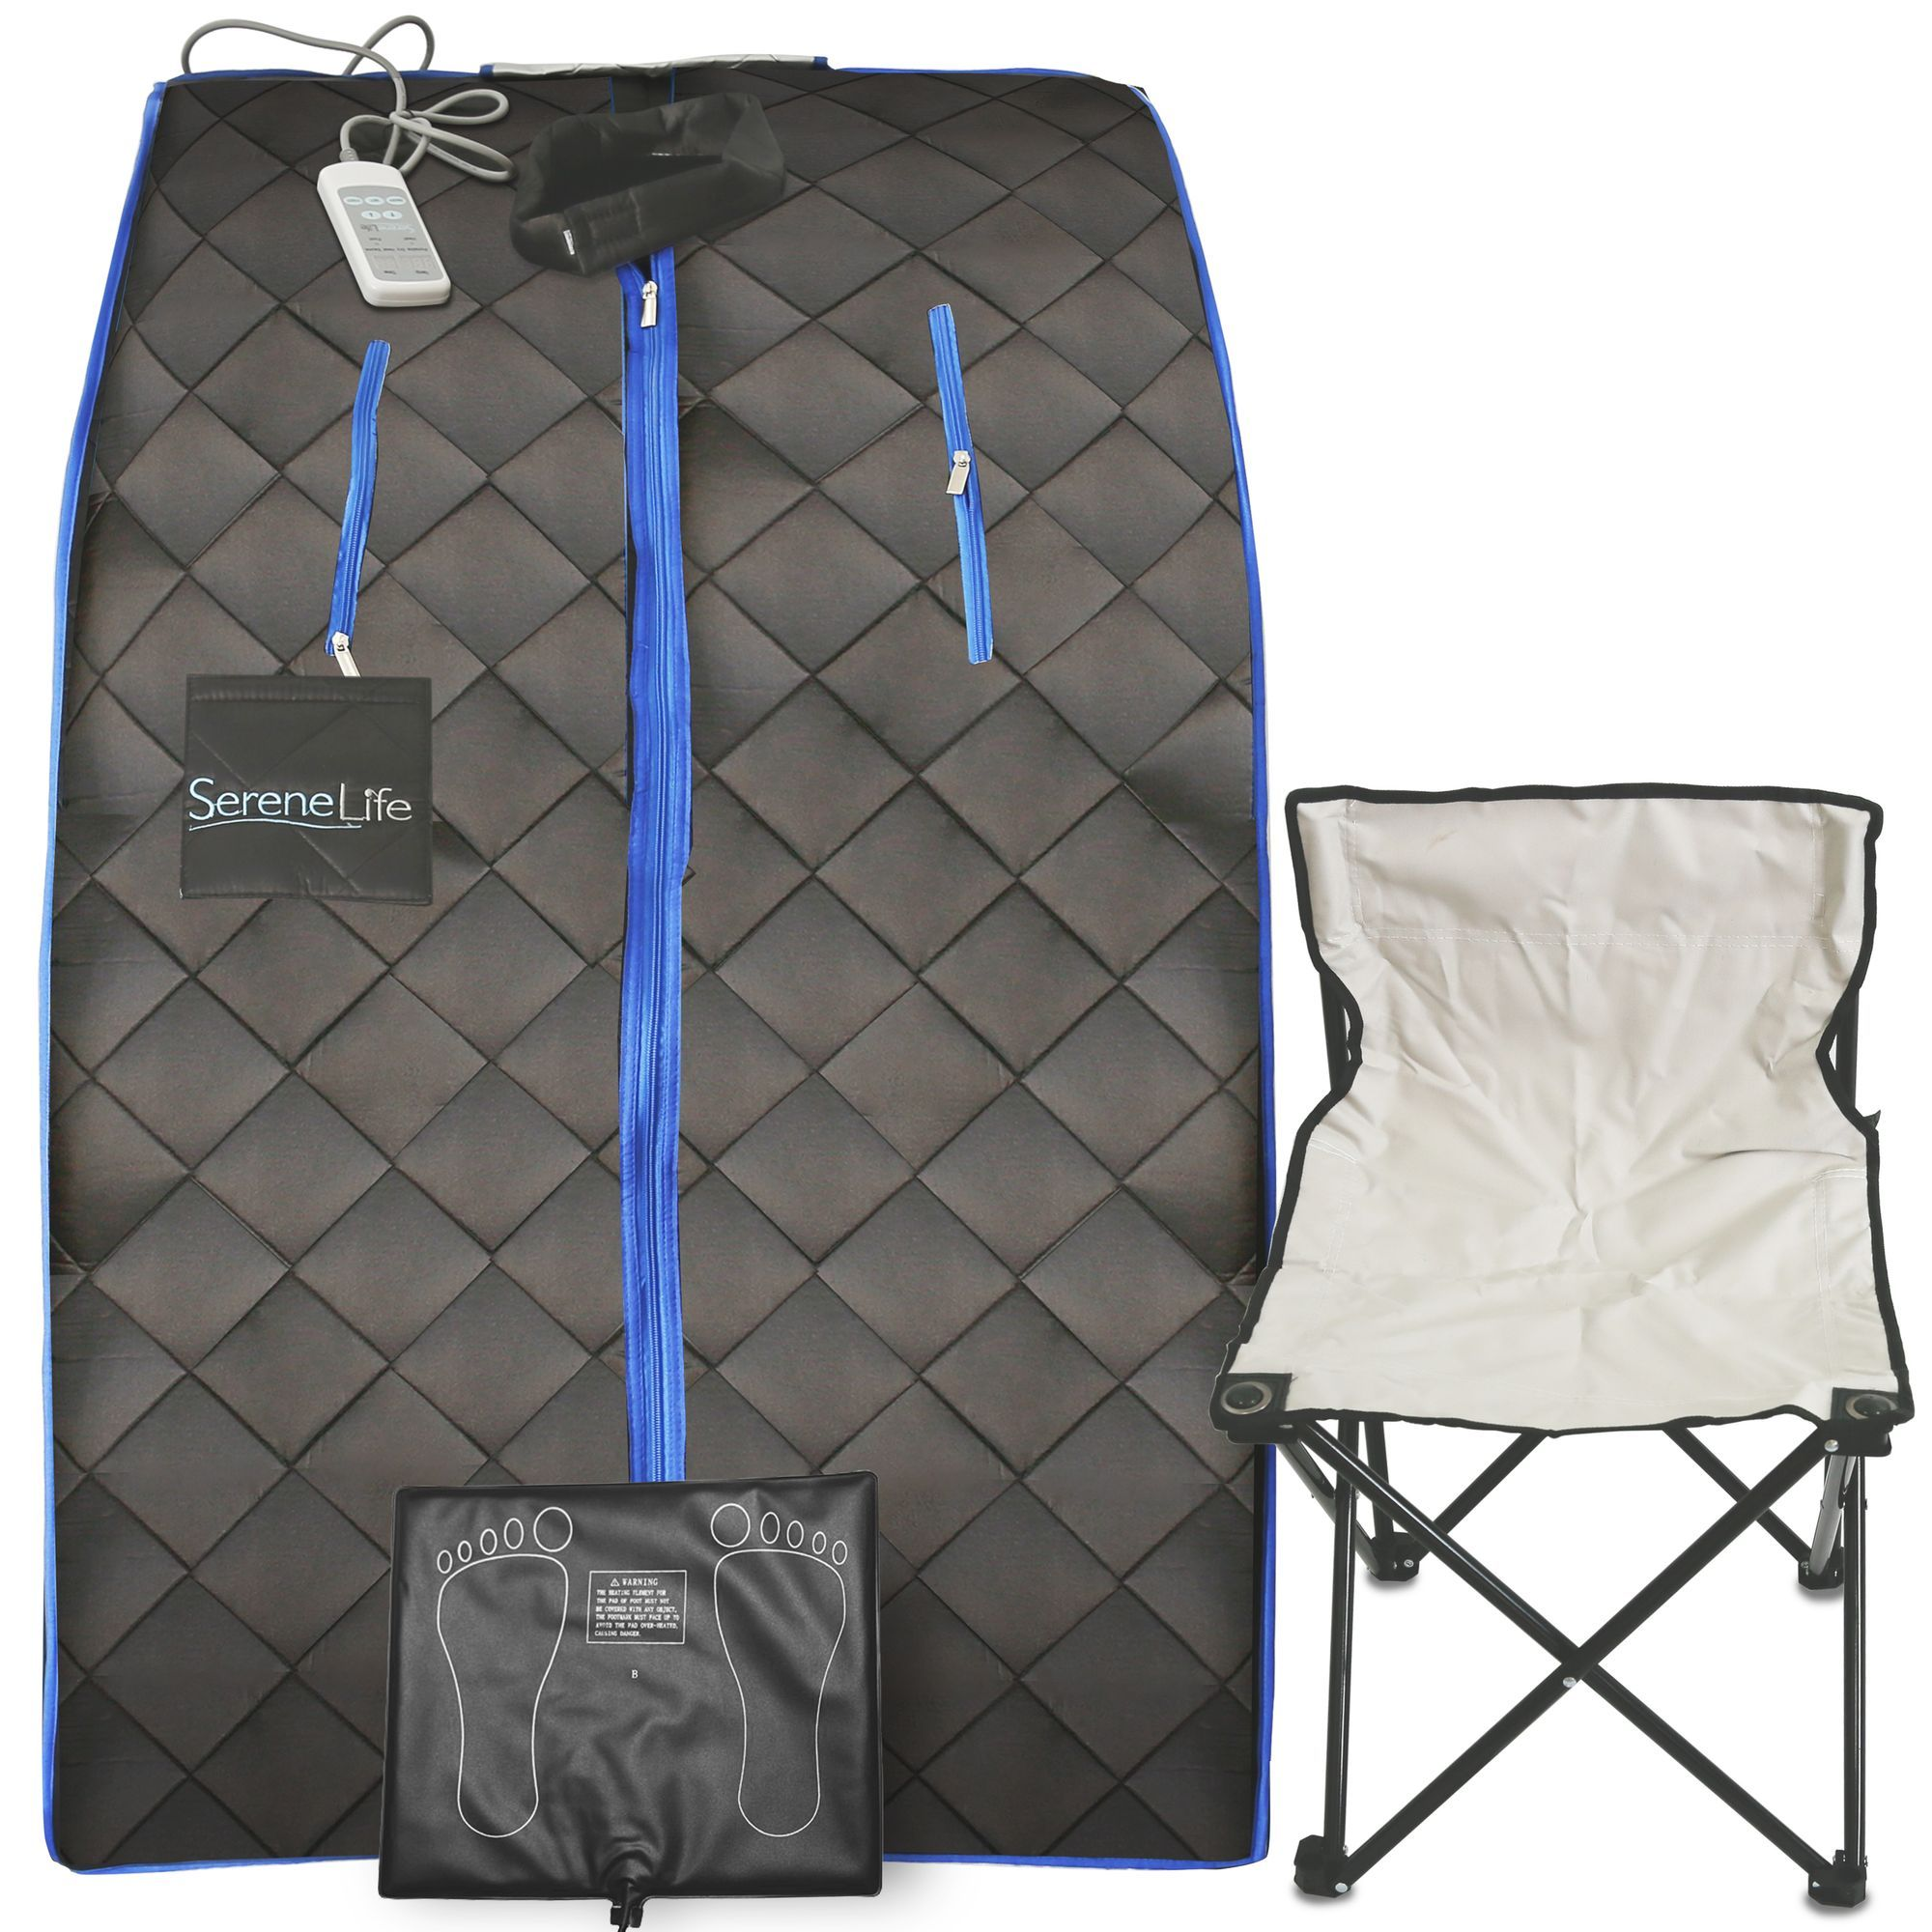 SereneLife Portable Infrared Home Spa | One Person Sauna | Heating Foot Pad and Foldable Chair